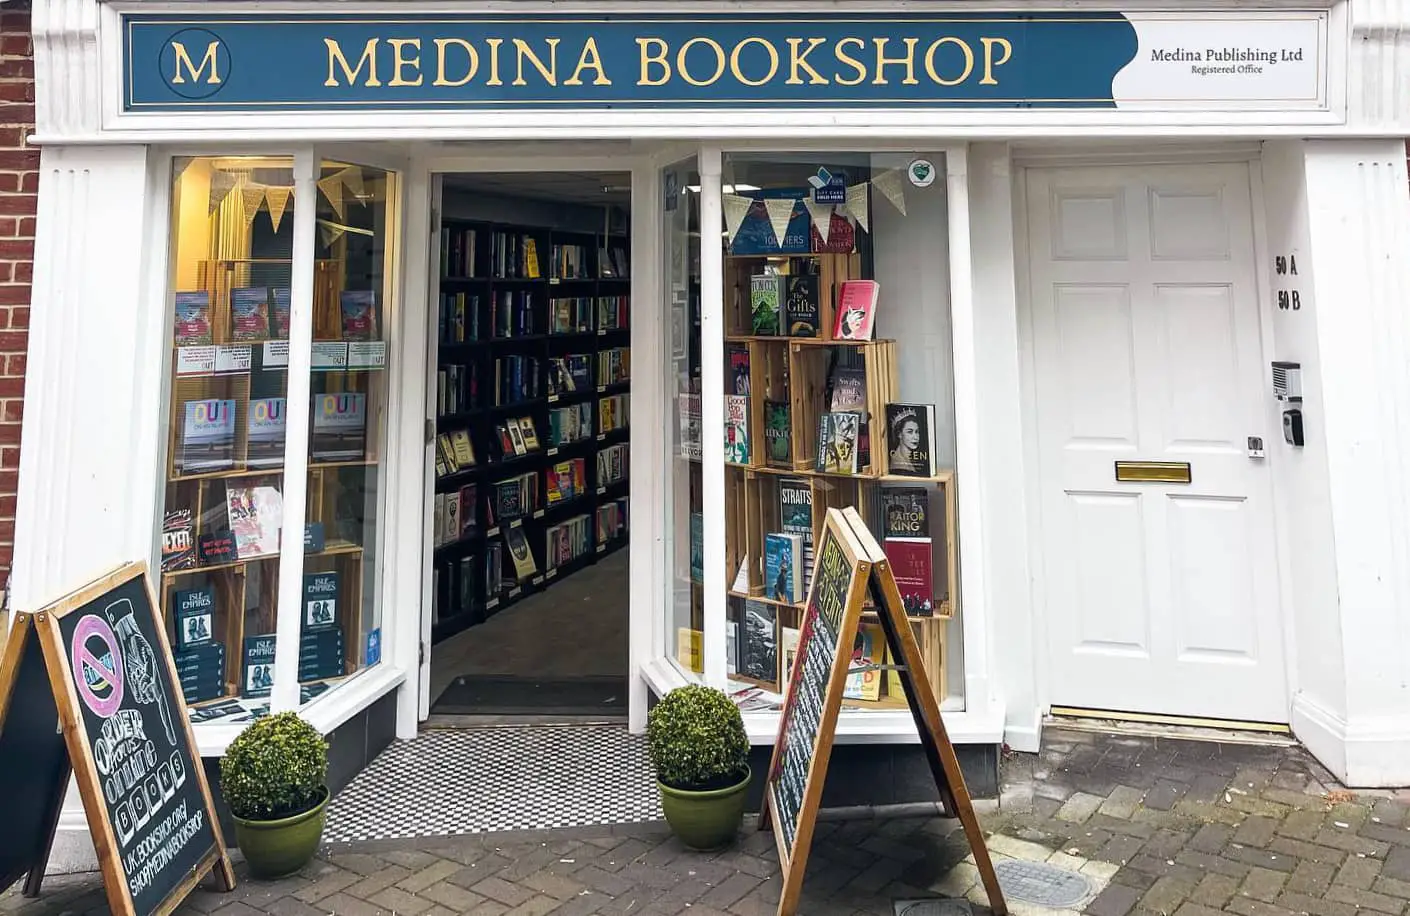 Medina bookshop from the outside